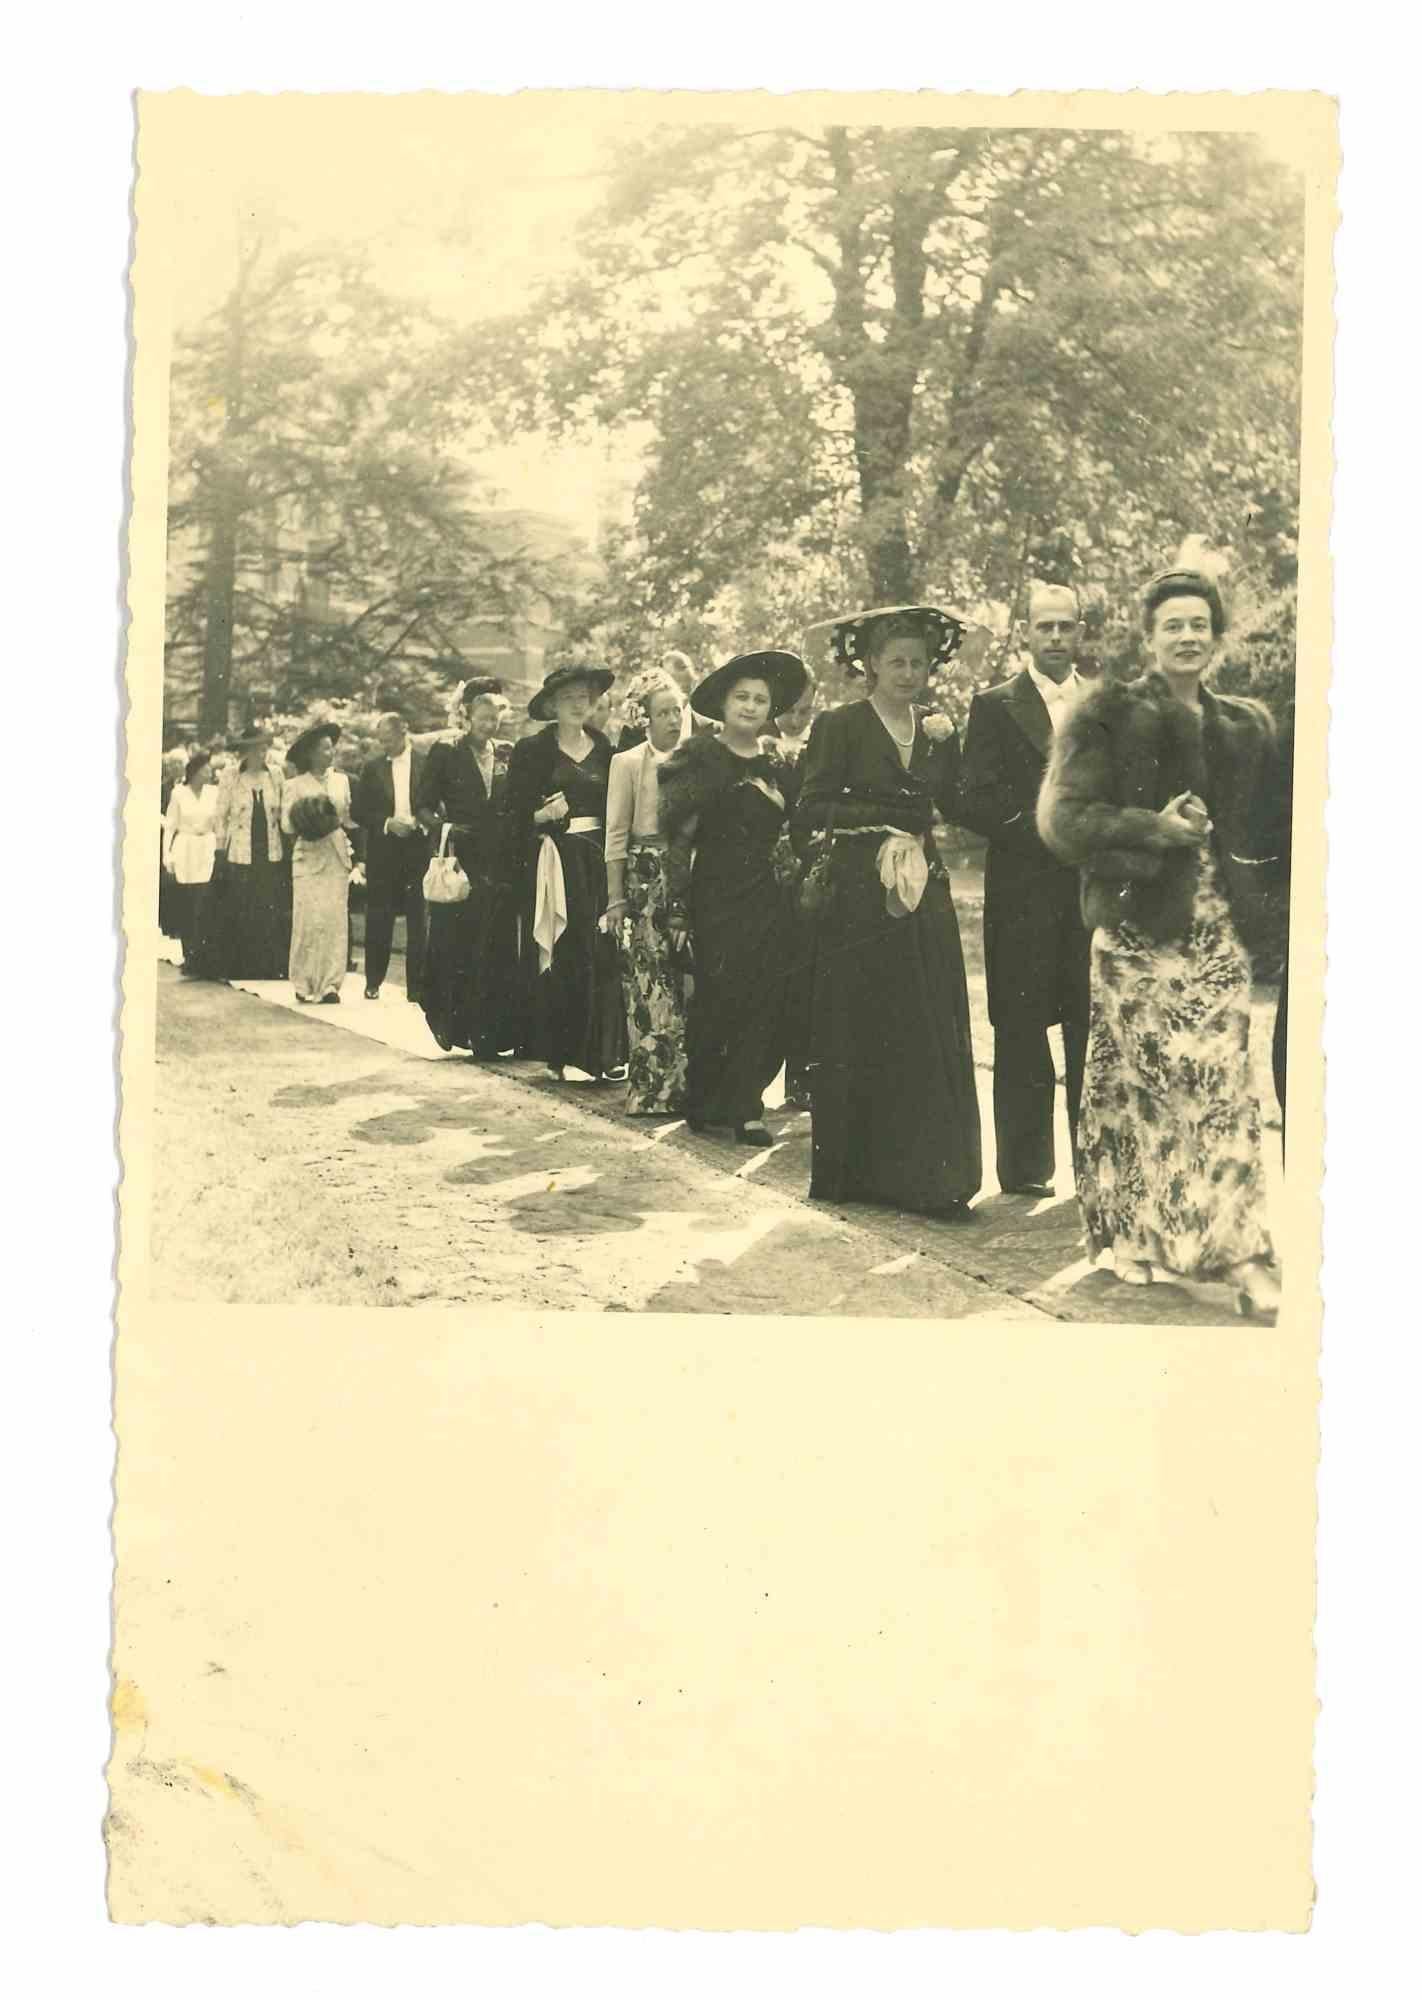 Unknown Landscape Photograph - The Old Days - Ceremony - Early 20th Century